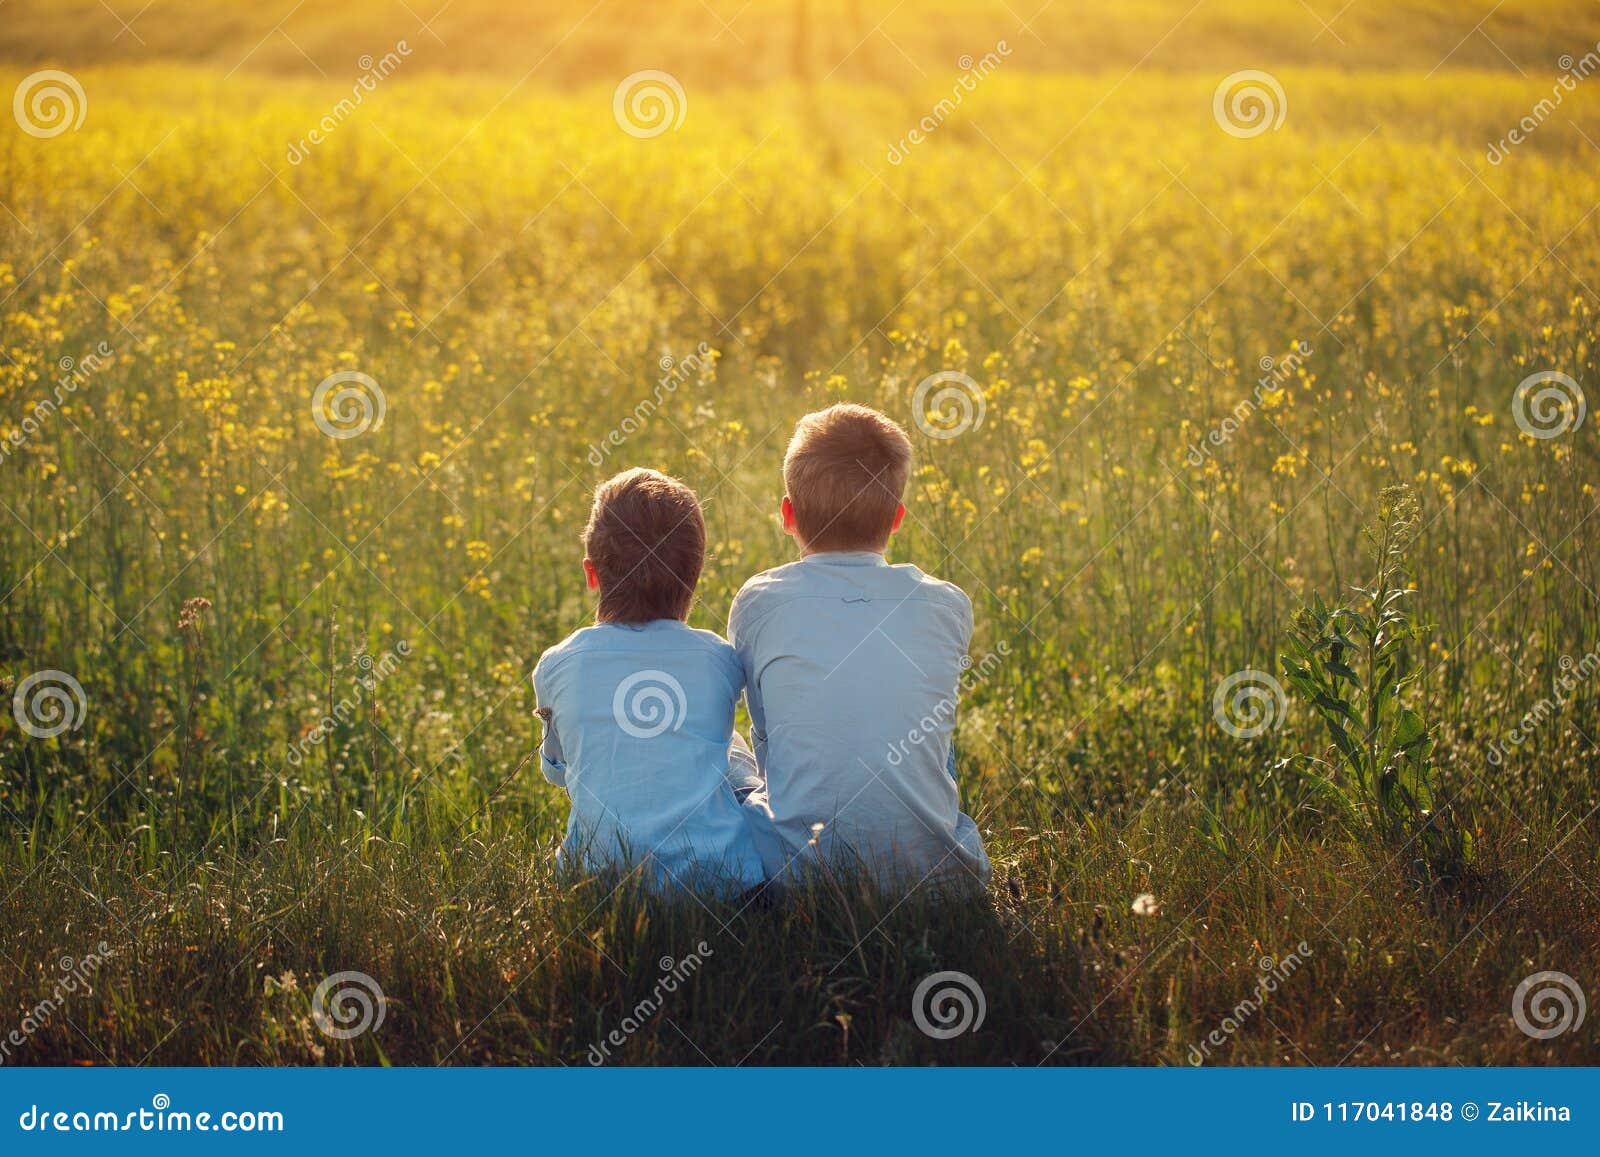 Two Little Boys Friends Hug Each Other on Sunset Summer. Brother ...